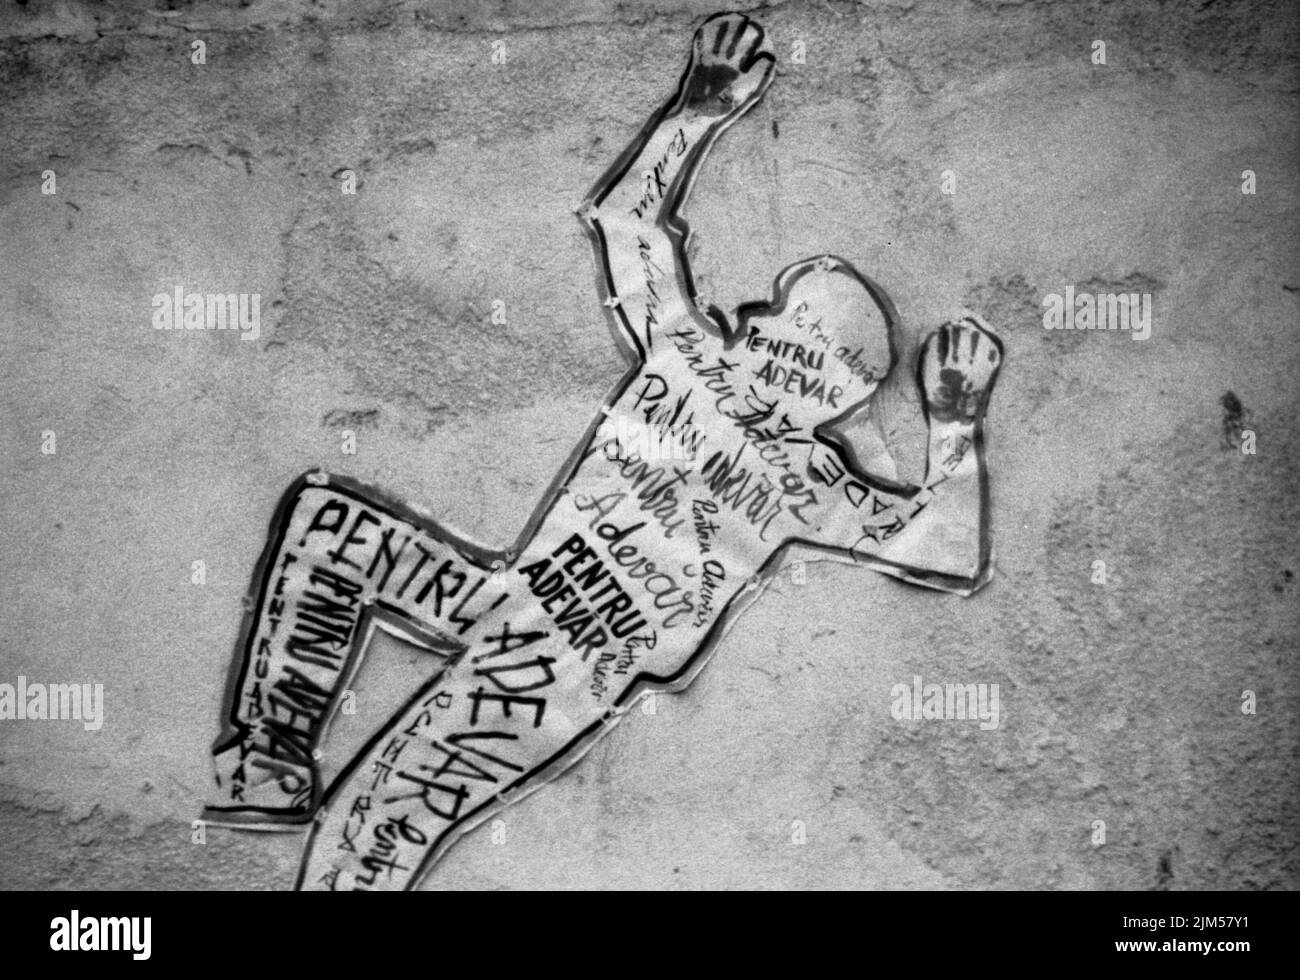 Bucharest, Romania, January 1990. An outline of a dead person placed on the wall of a building in the University Square, one of the key points of the Romanian anticommunist revolution of December 1989. His body is covered with the words '(Dead) for the truth'. Stock Photo